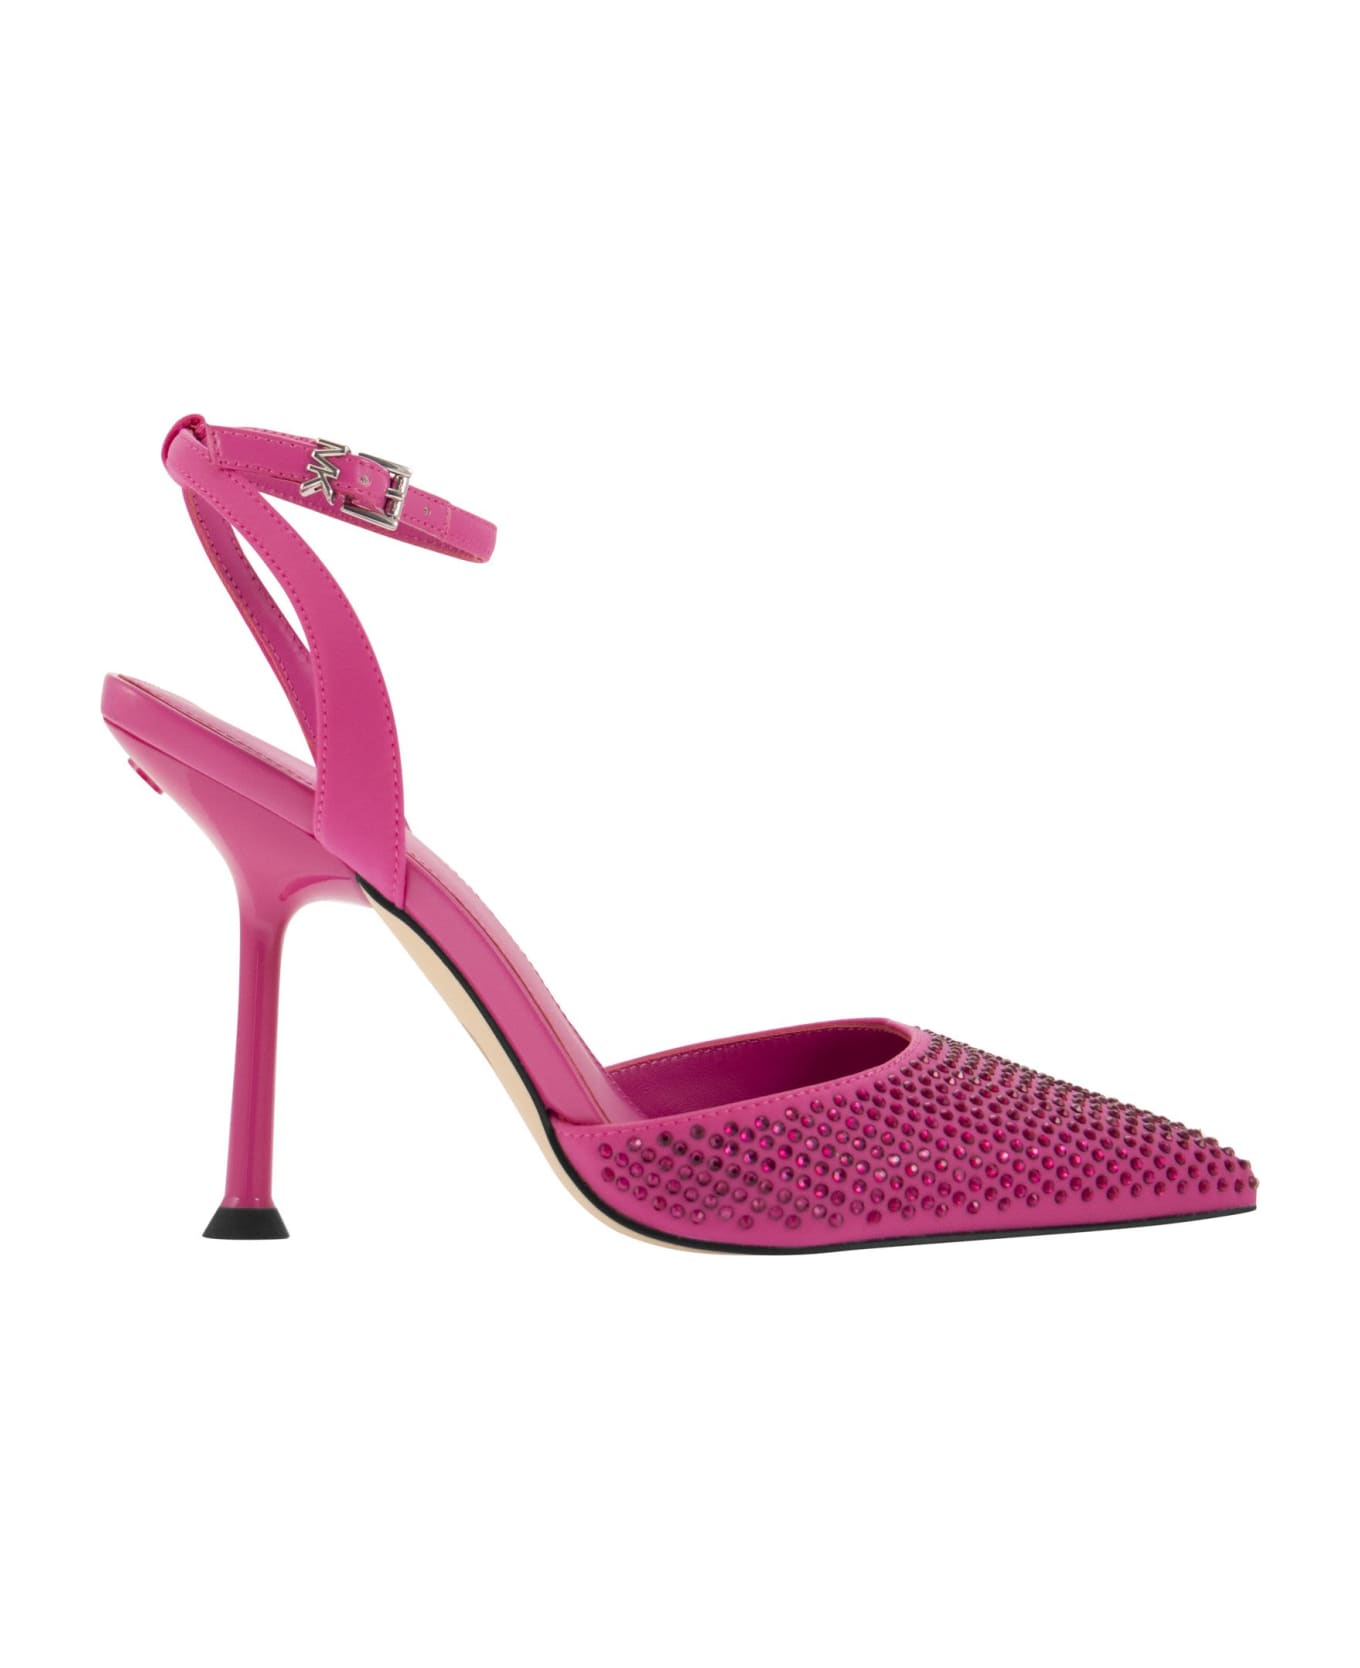 MICHAEL Michael Kors Imani Pump Pumps In Fabric With Crystals - Cerise ハイヒール